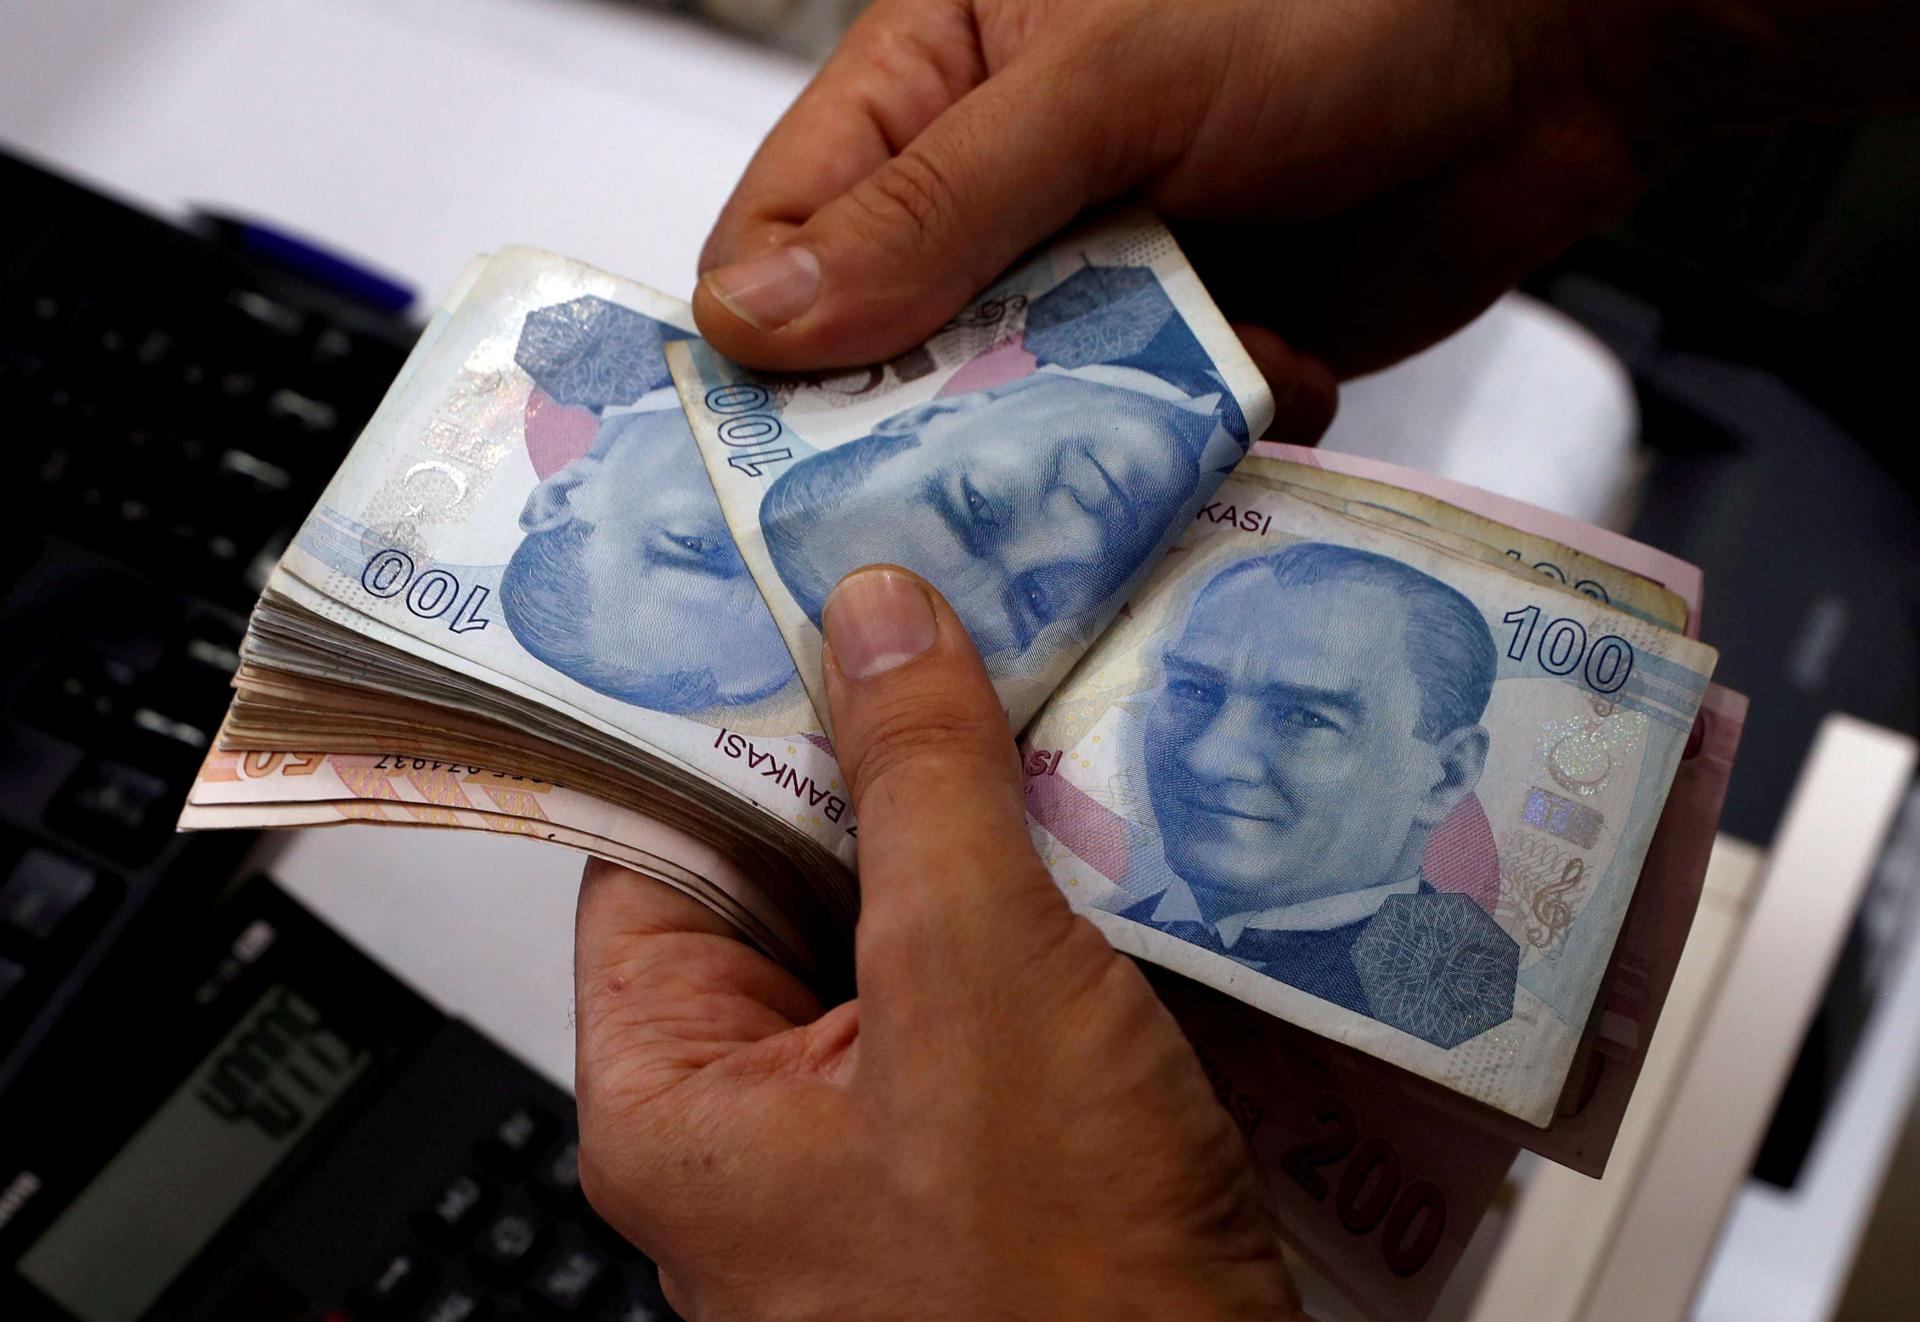 The Turkish lira traded at 5.3 against the dollar on Monday